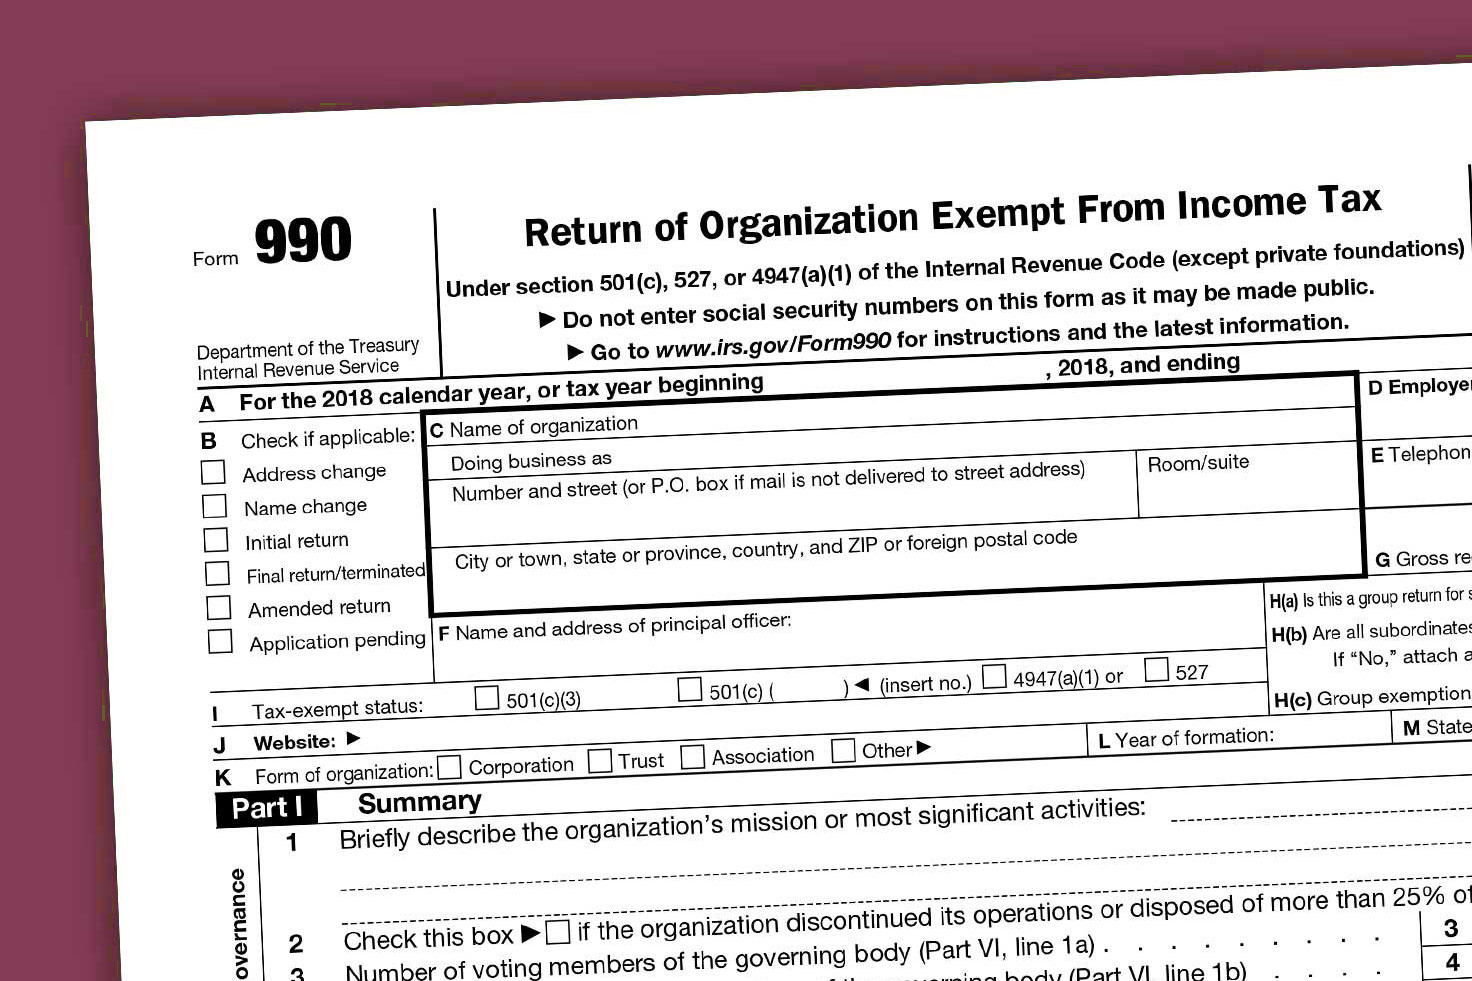 Form 990 Thumbnail - pink background.